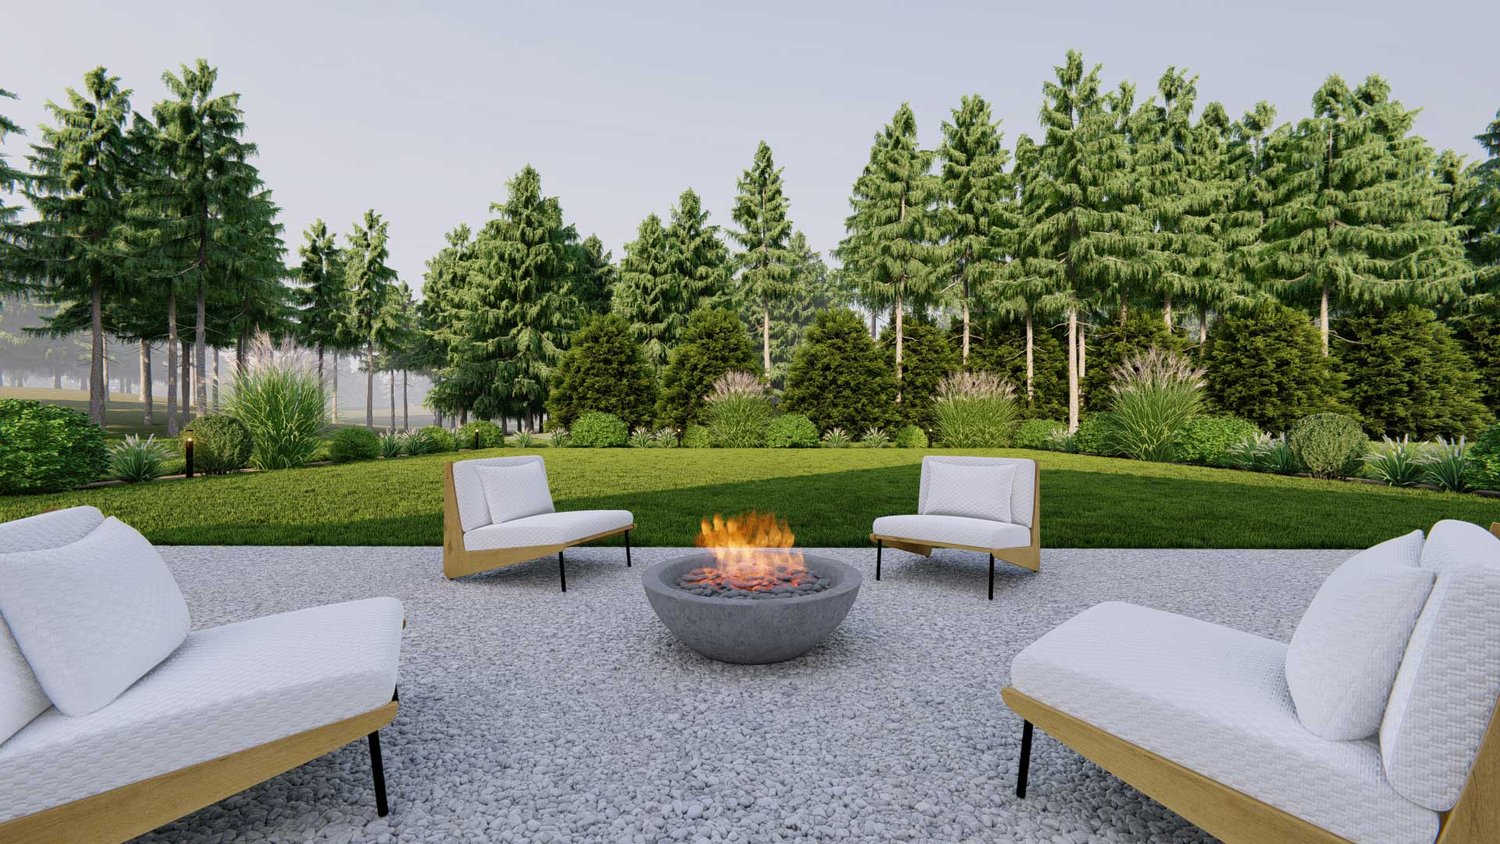 Twin Falls gravel fire pit seating area with lounge chairs